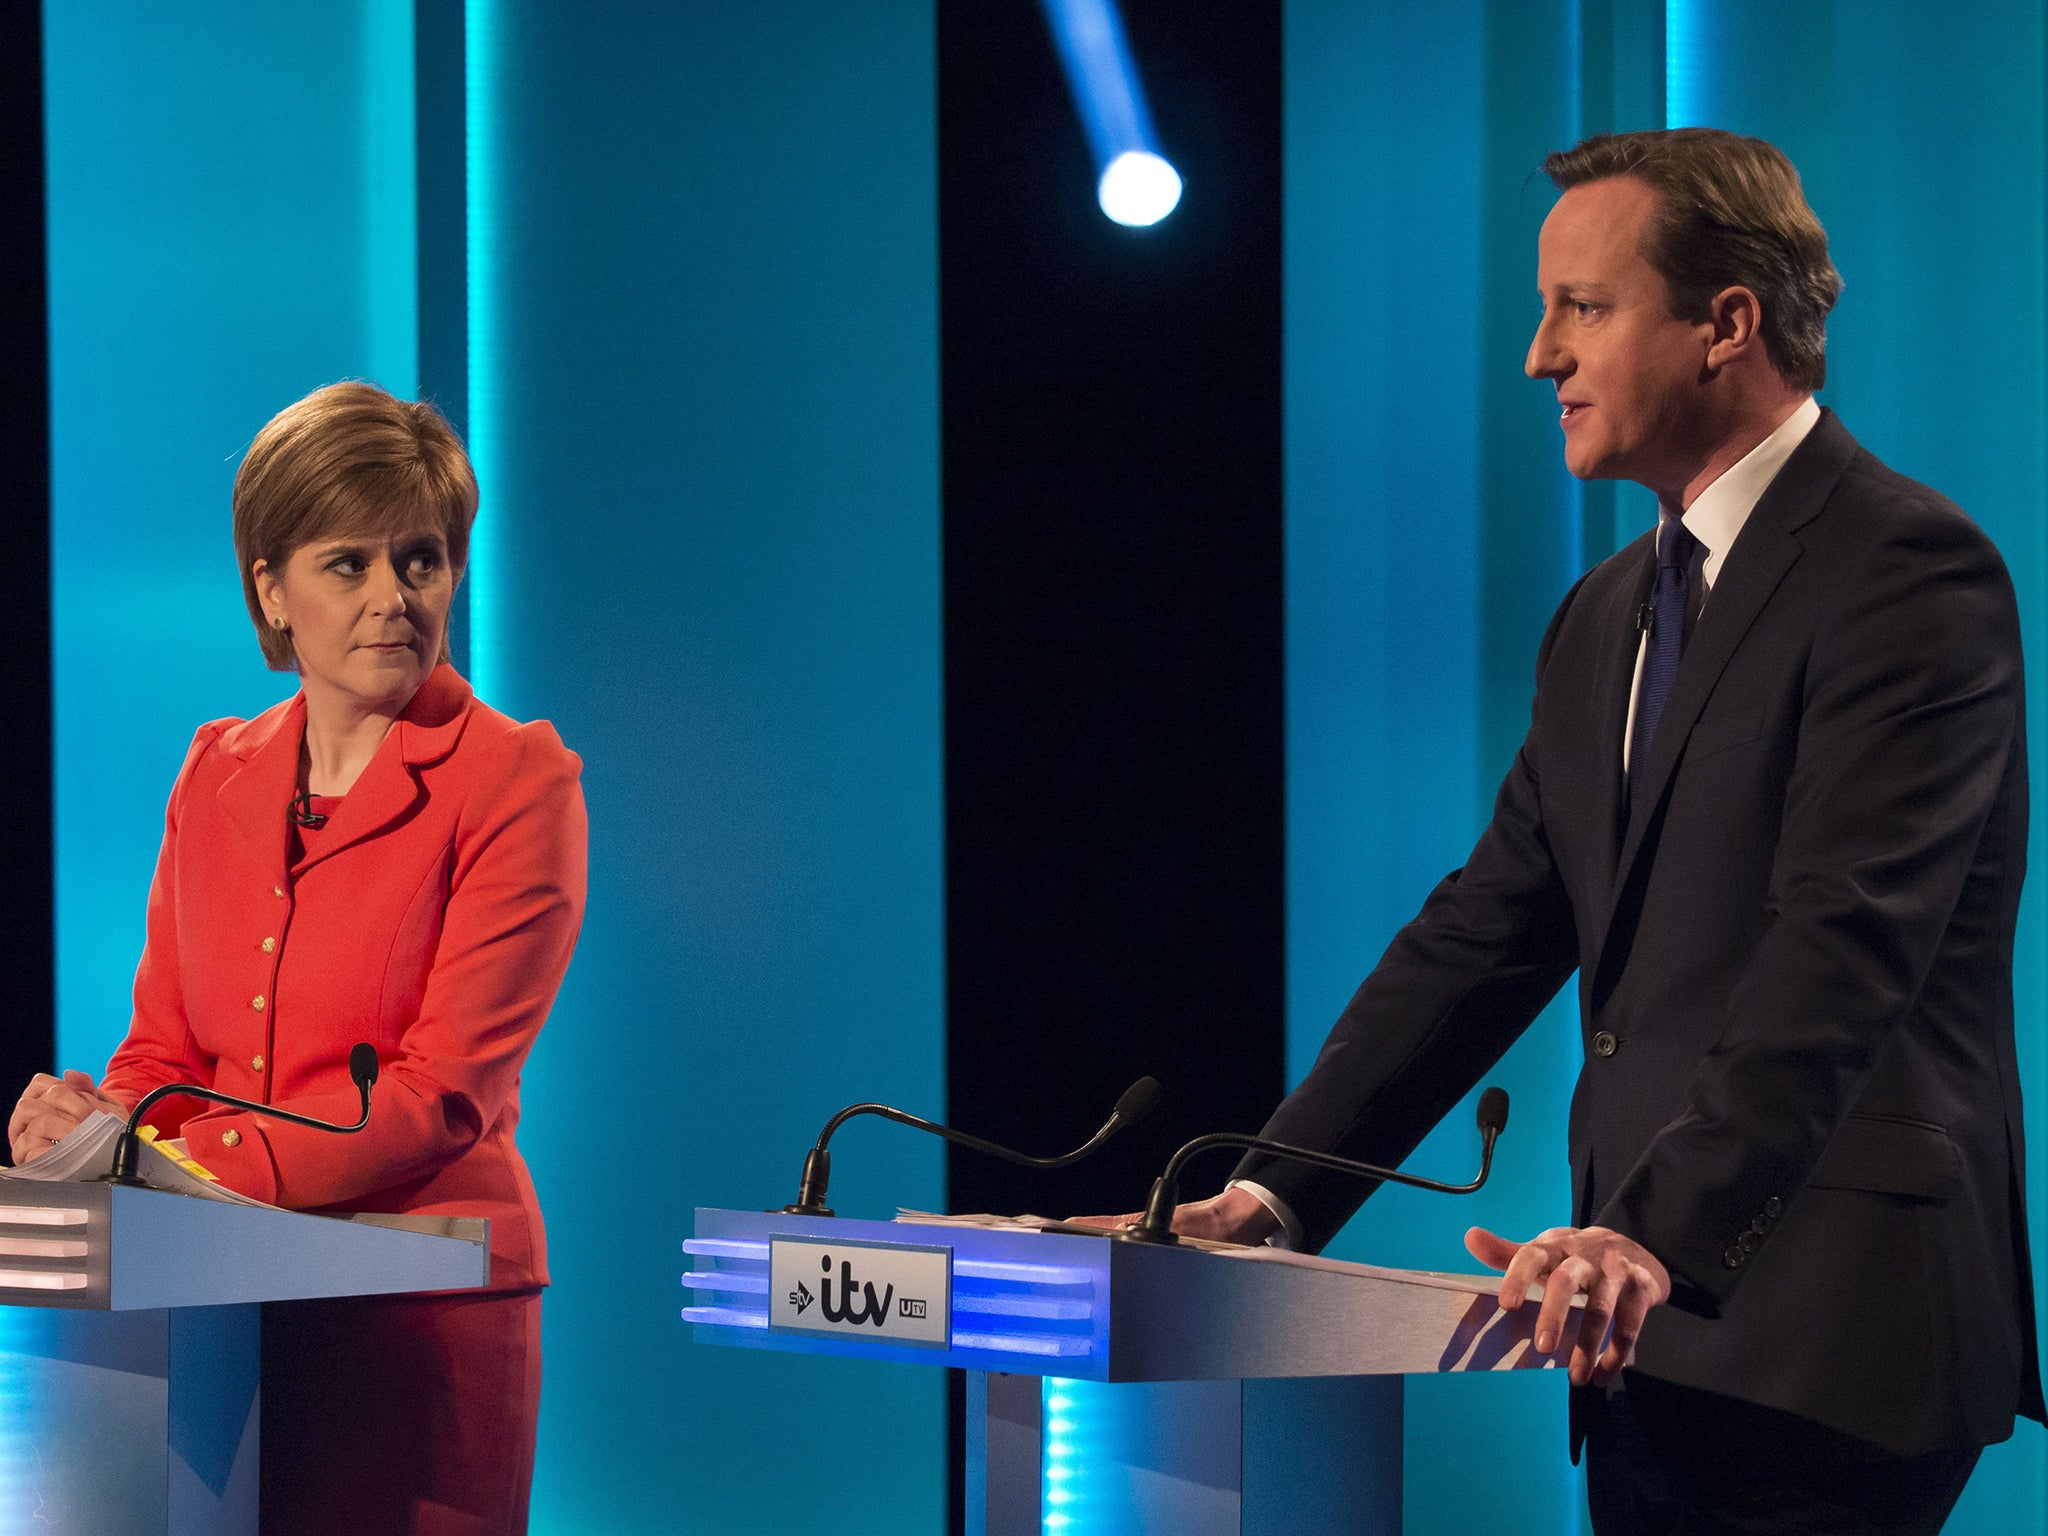 The Prime Minister “fundamentally disagrees” with Nicola Sturgeon on the two big issues of the time—the deficit and the Union